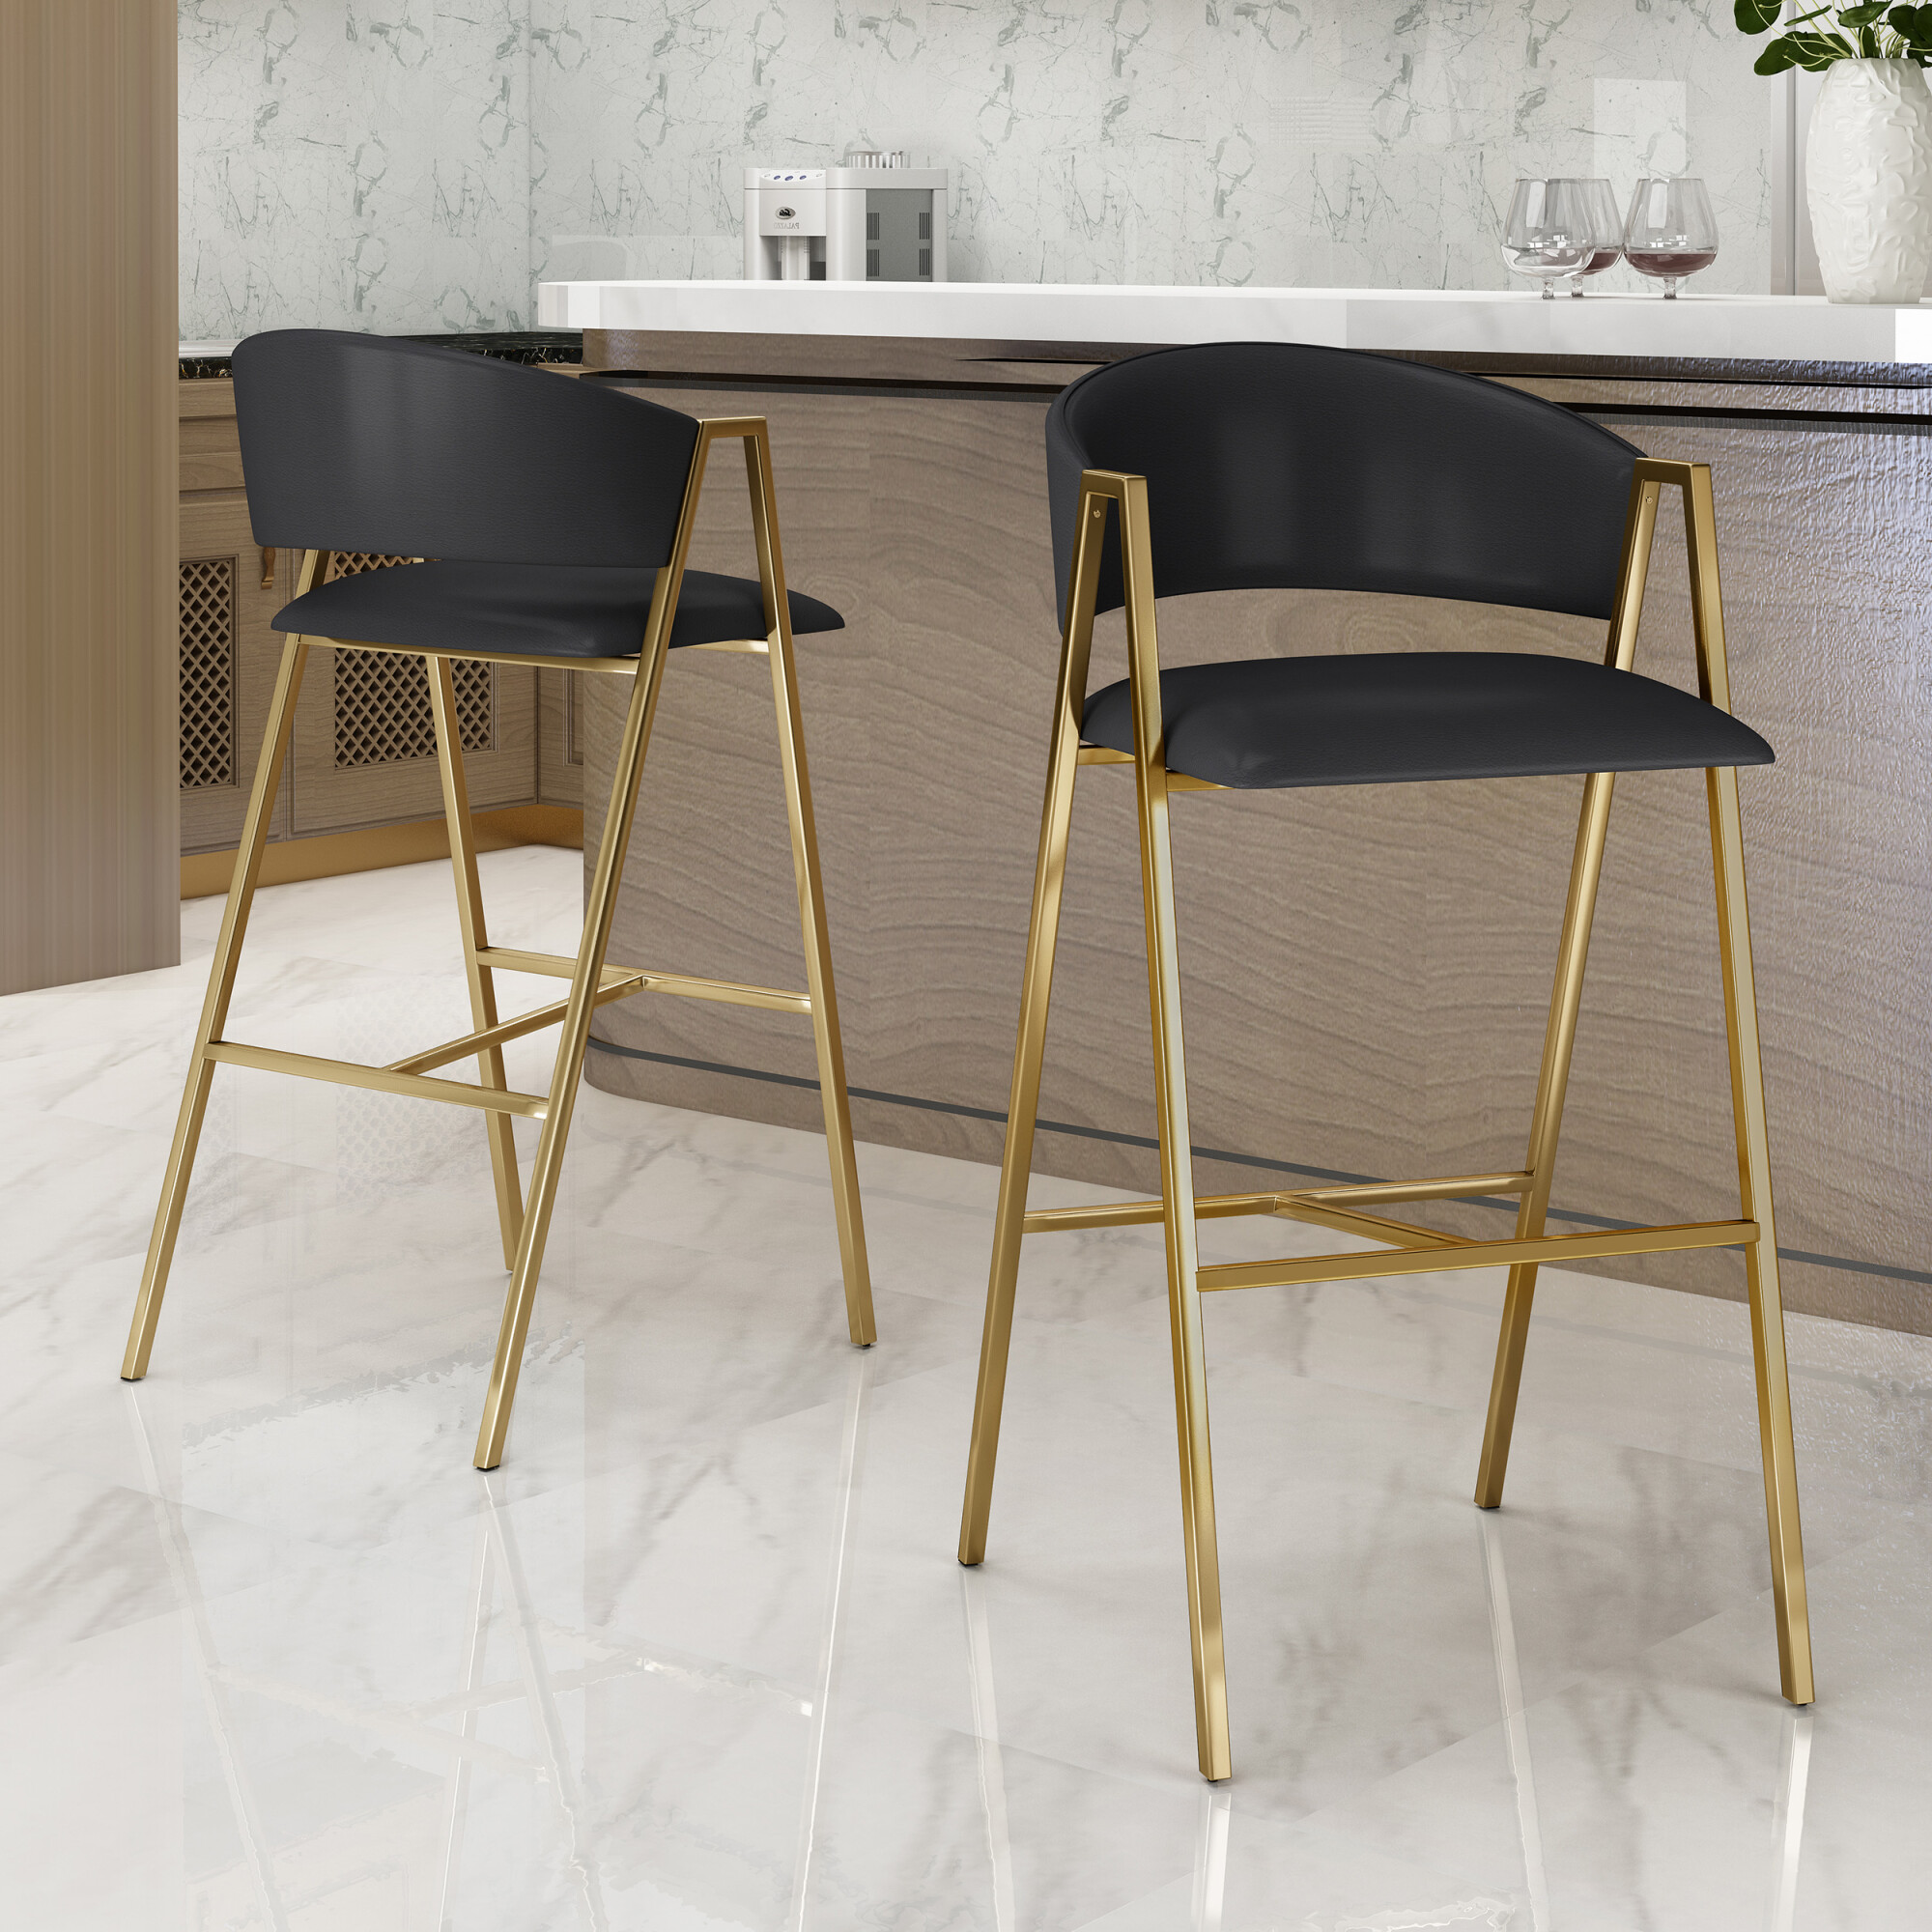 Folwell Modern Faux Leather Barstool (Set of 2), Black and Gold in ...